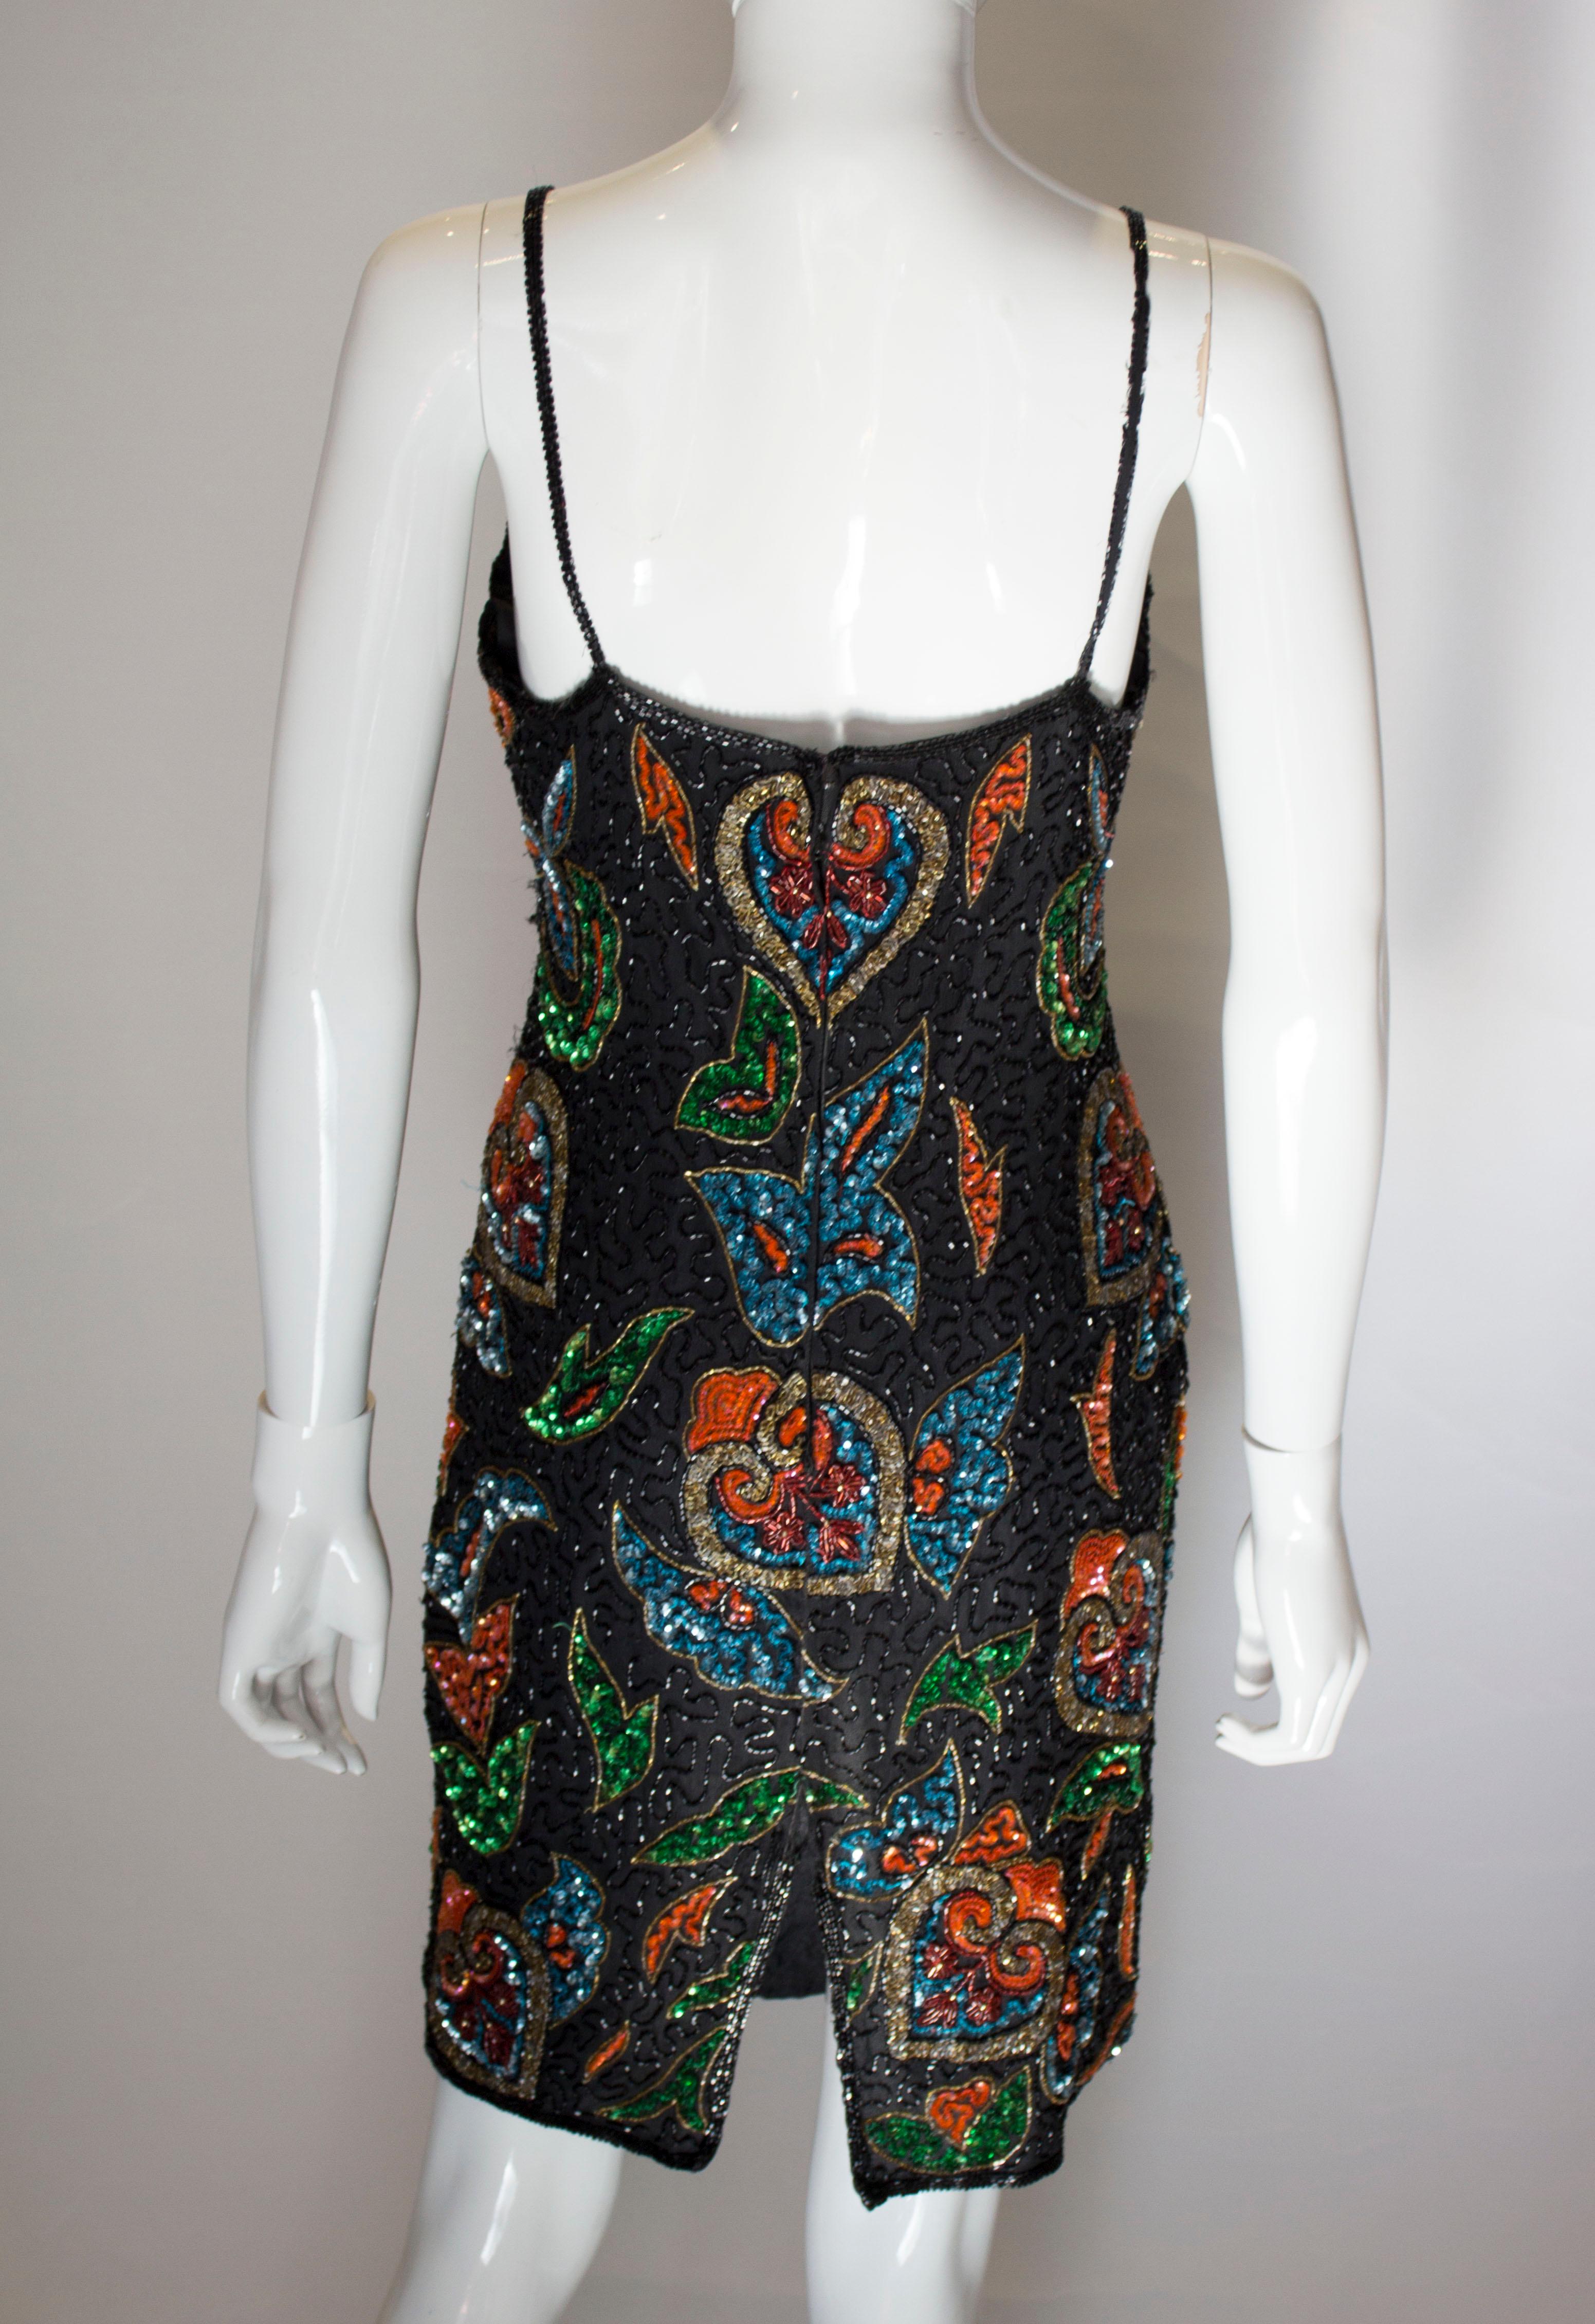 Vintage Beaded Cocktail Dress by Party Time In Good Condition For Sale In London, GB